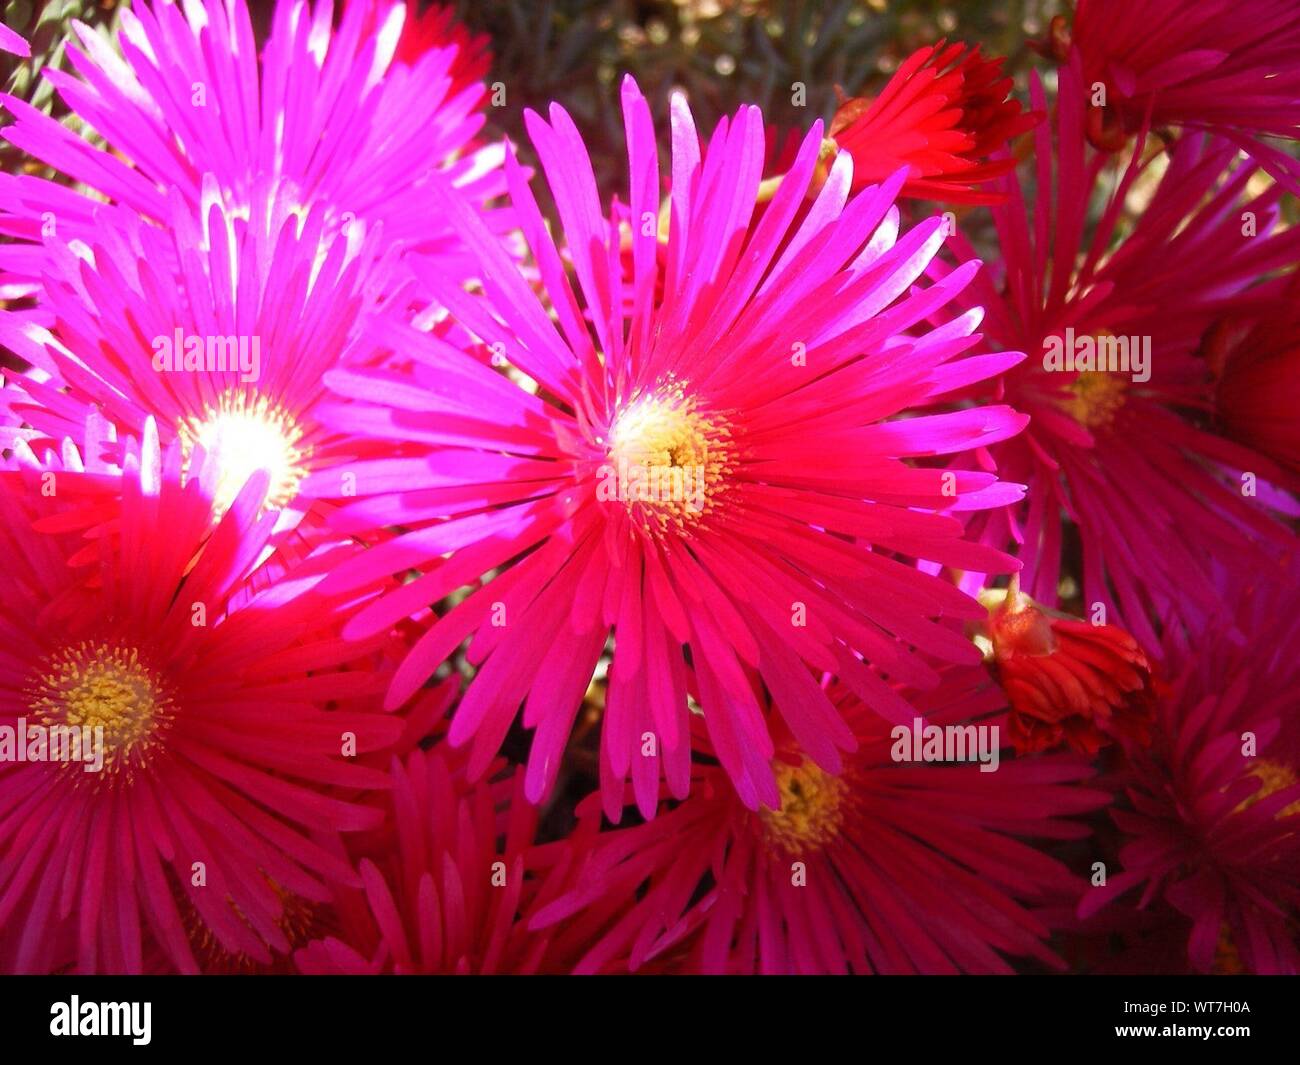 Focusing On Pink Flower Heads Stock Photo